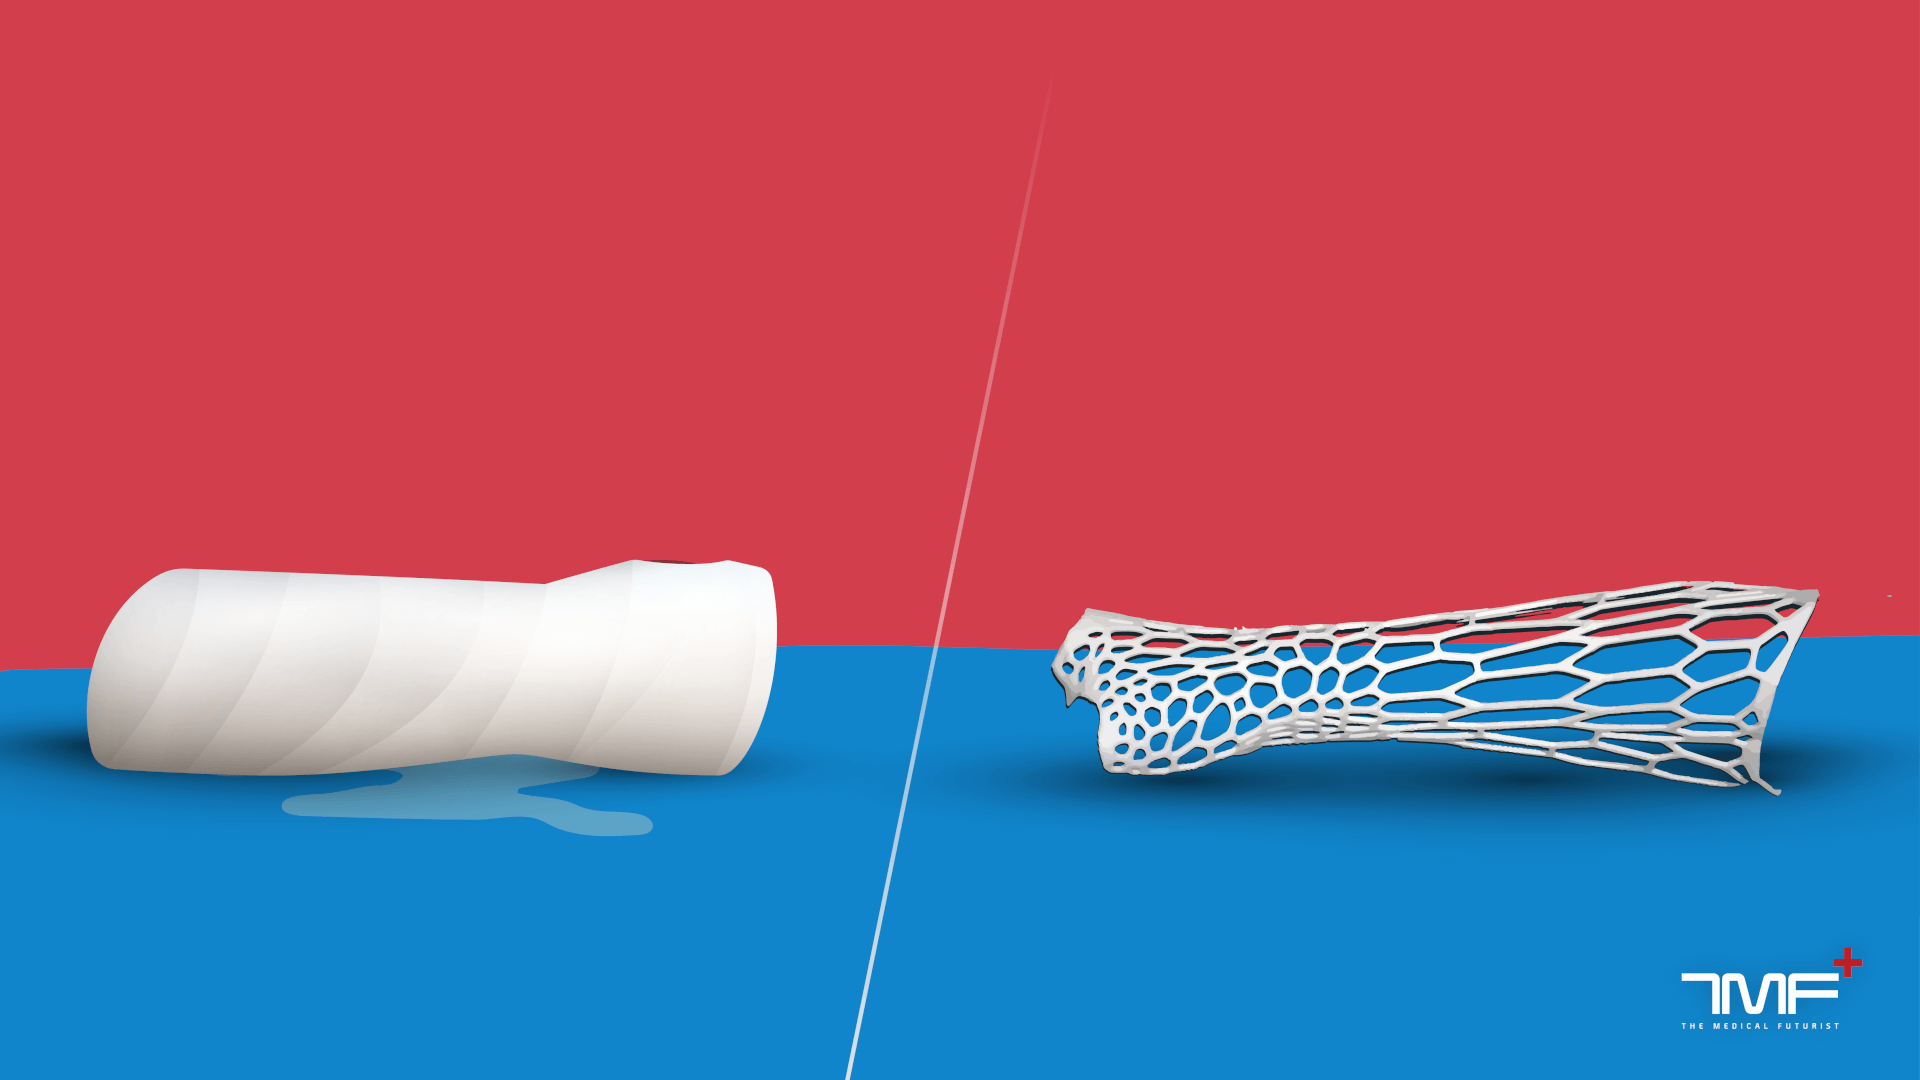 Where Are 3D-Printed Casts?